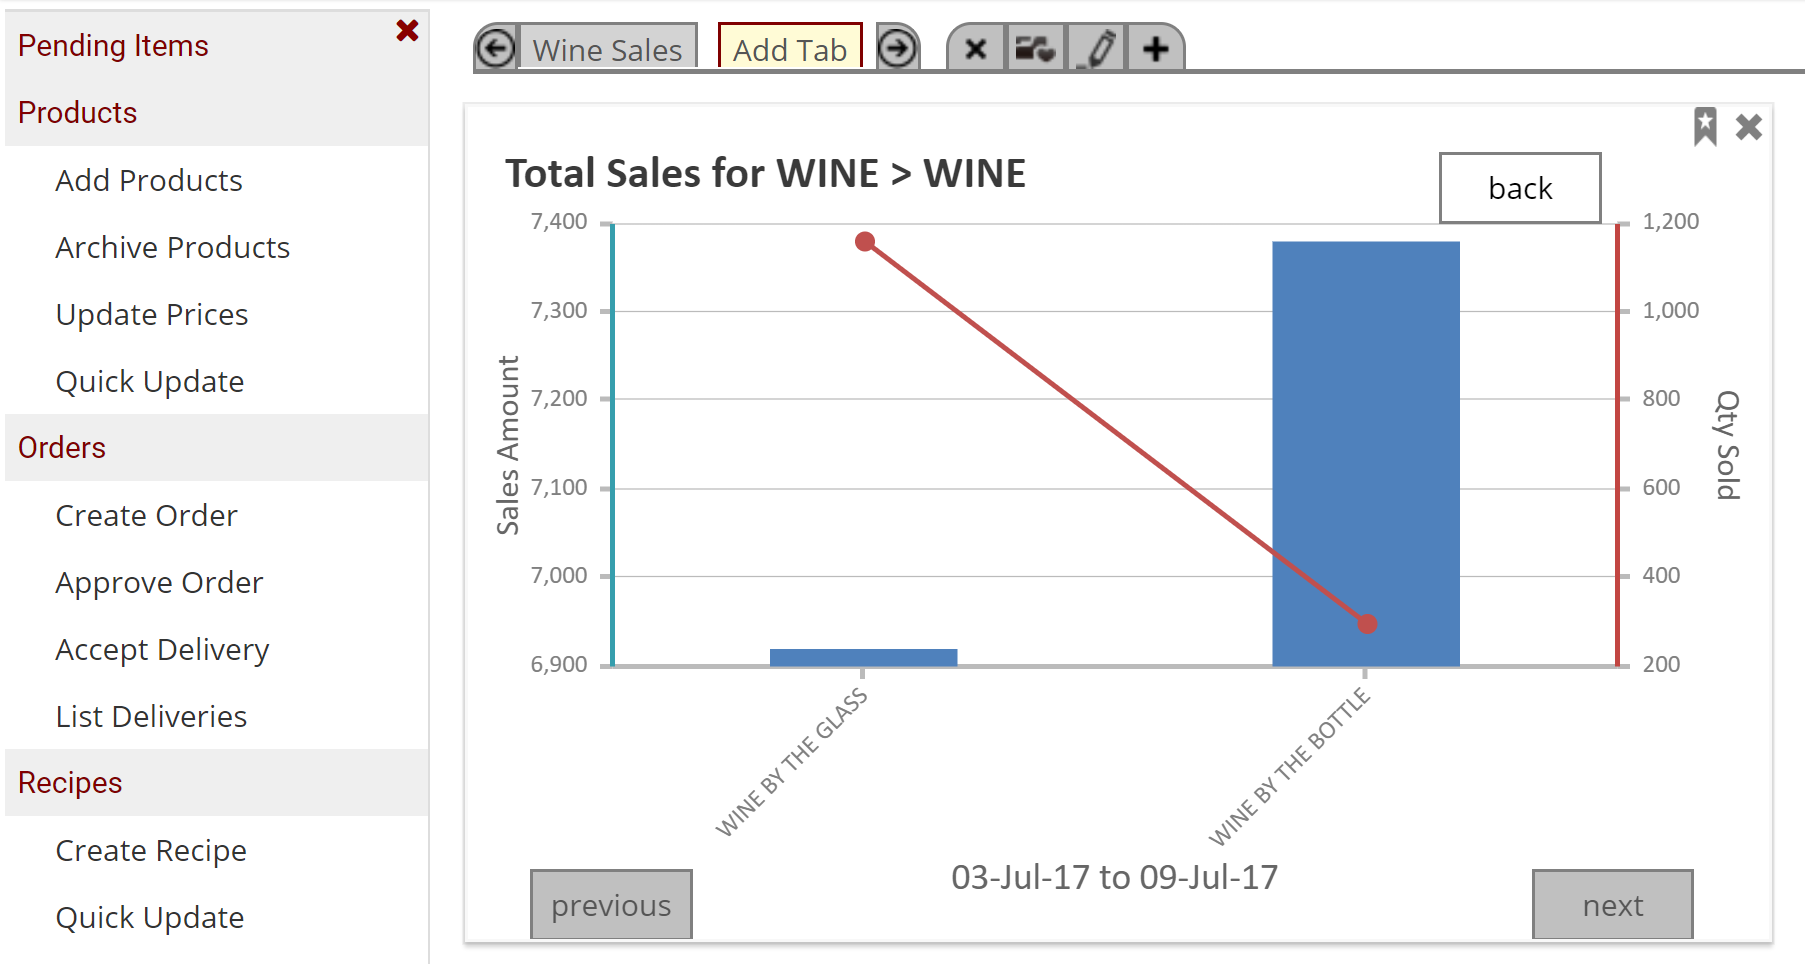 Wine_Sales_drill_2.PNG